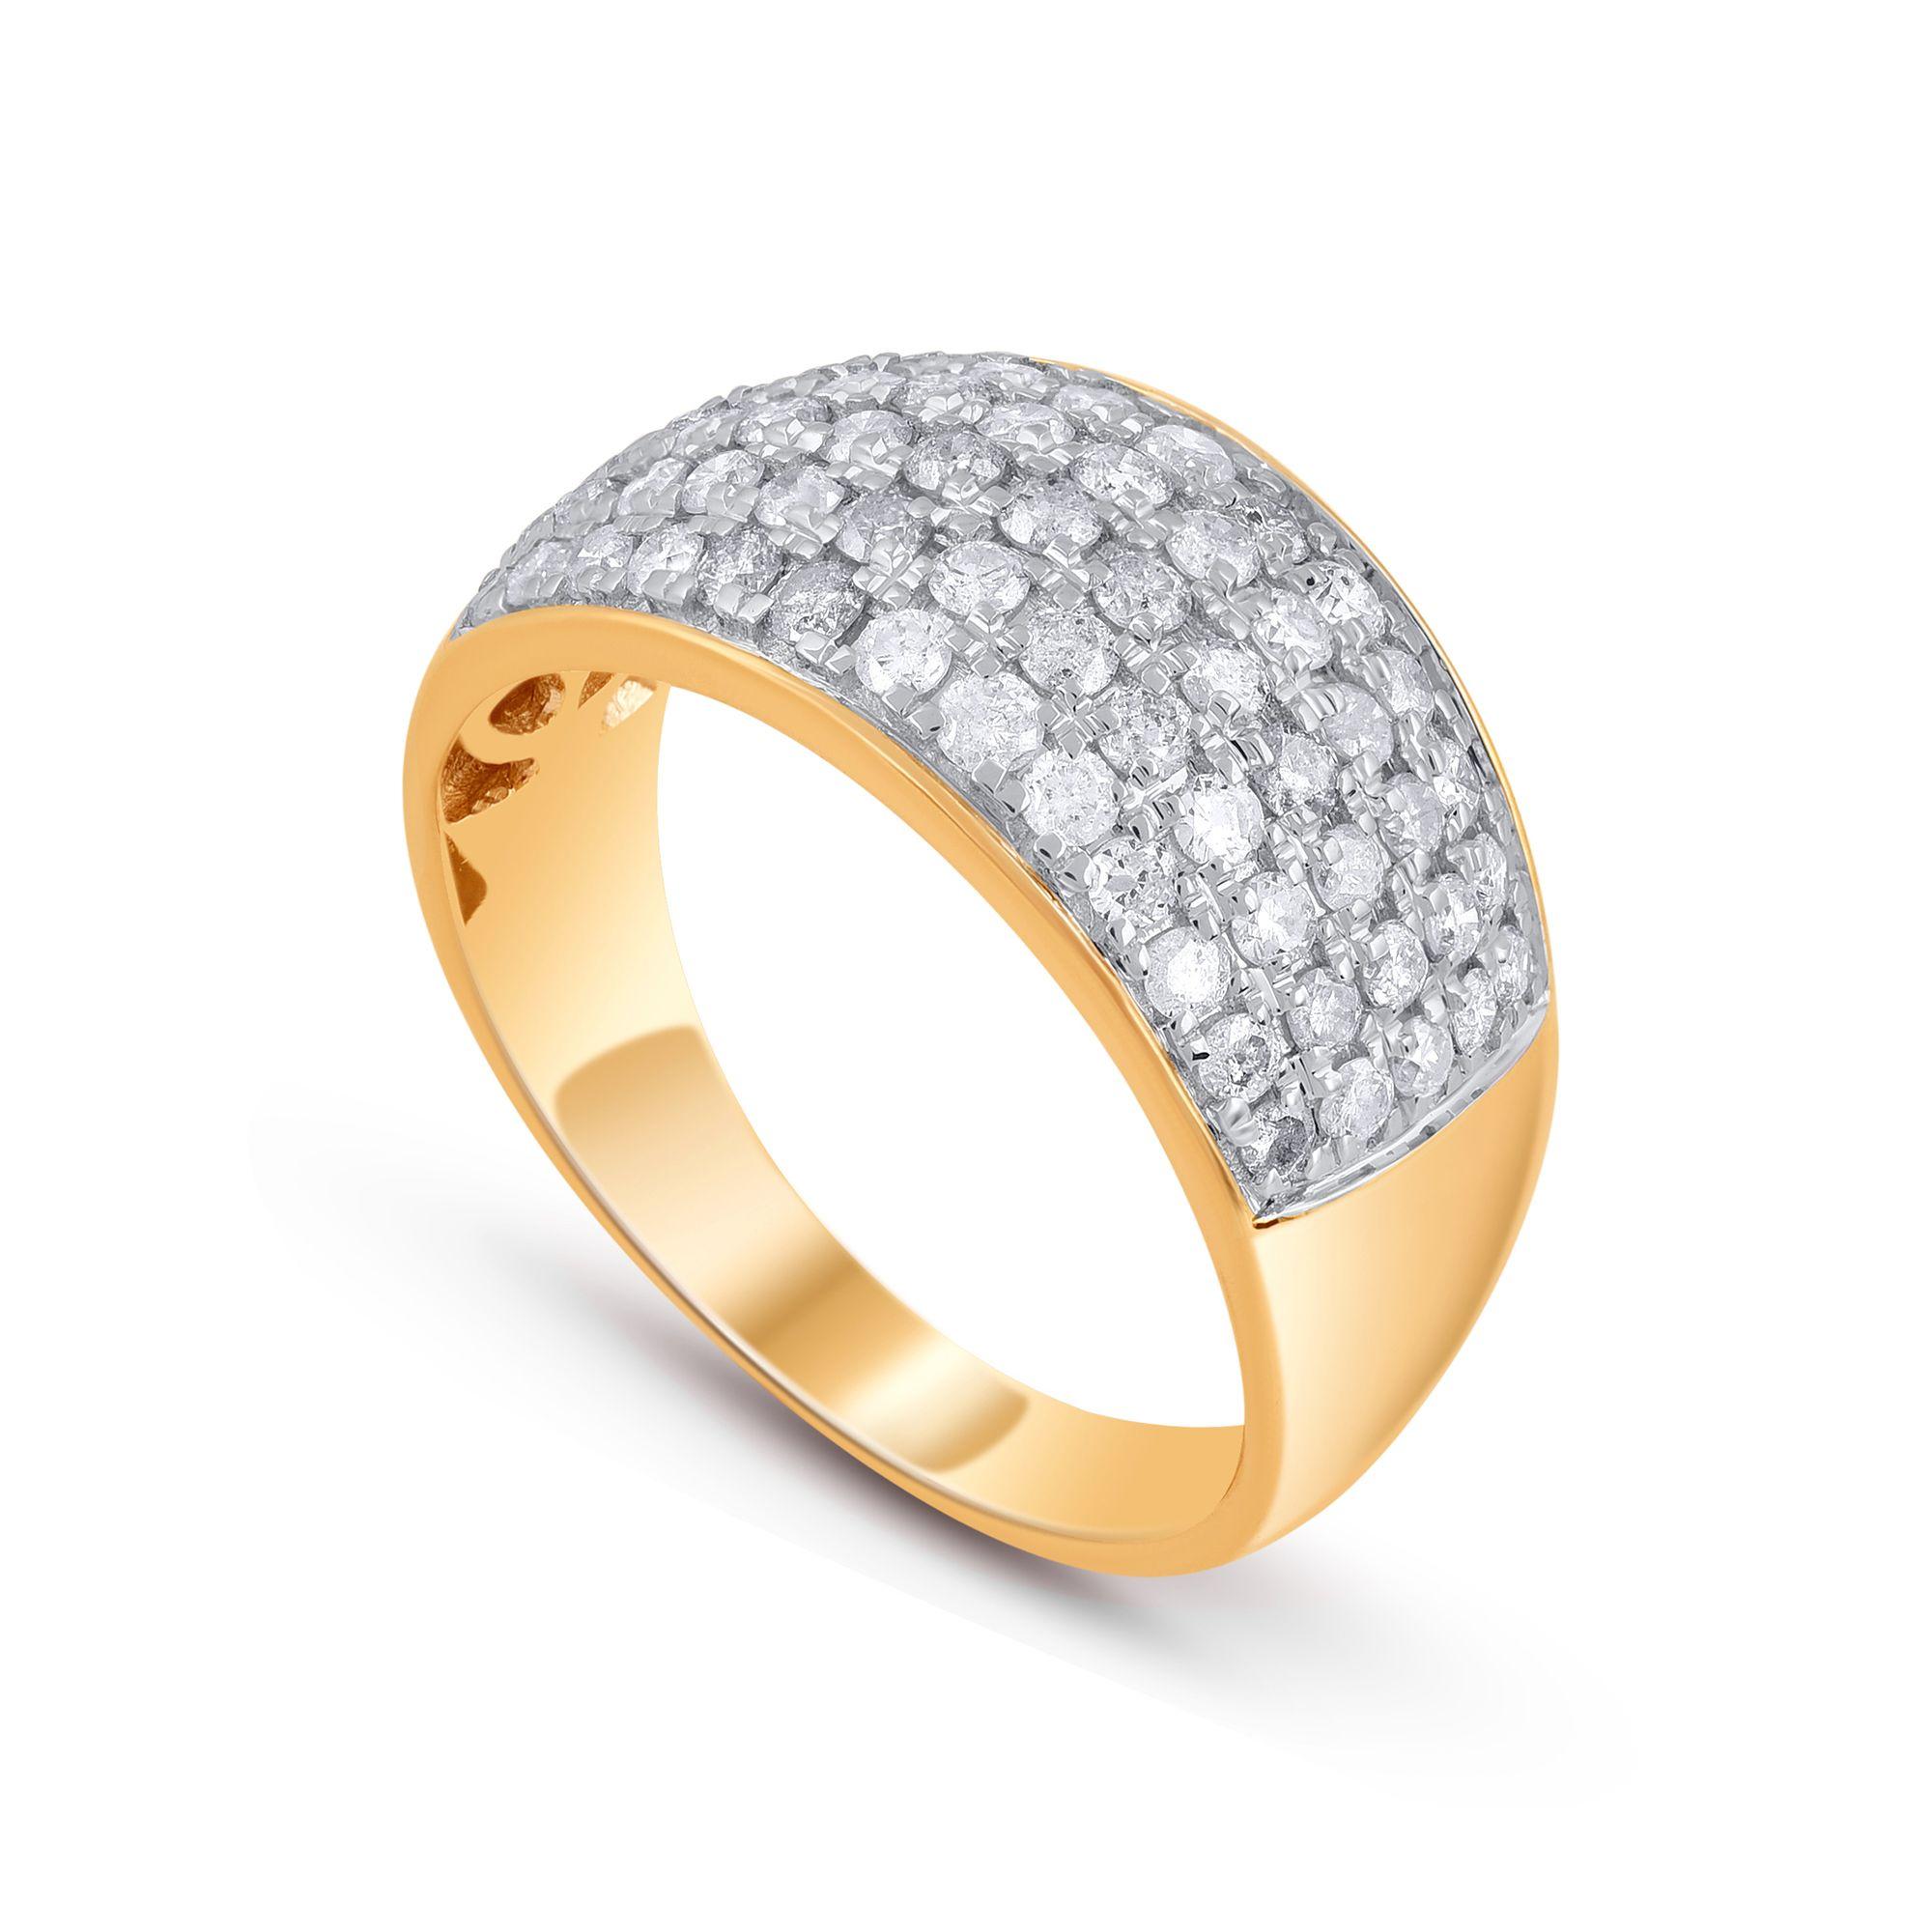 Shine brilliantly in this multi row stylish bridal band, studded with 65 diamonds in prong setting. Crafted expertly in 10-karat yellow Gold. The diamonds are graded G-H Color, I2-I3 Clarity. 

Ring size and metal color can be customized on request. 